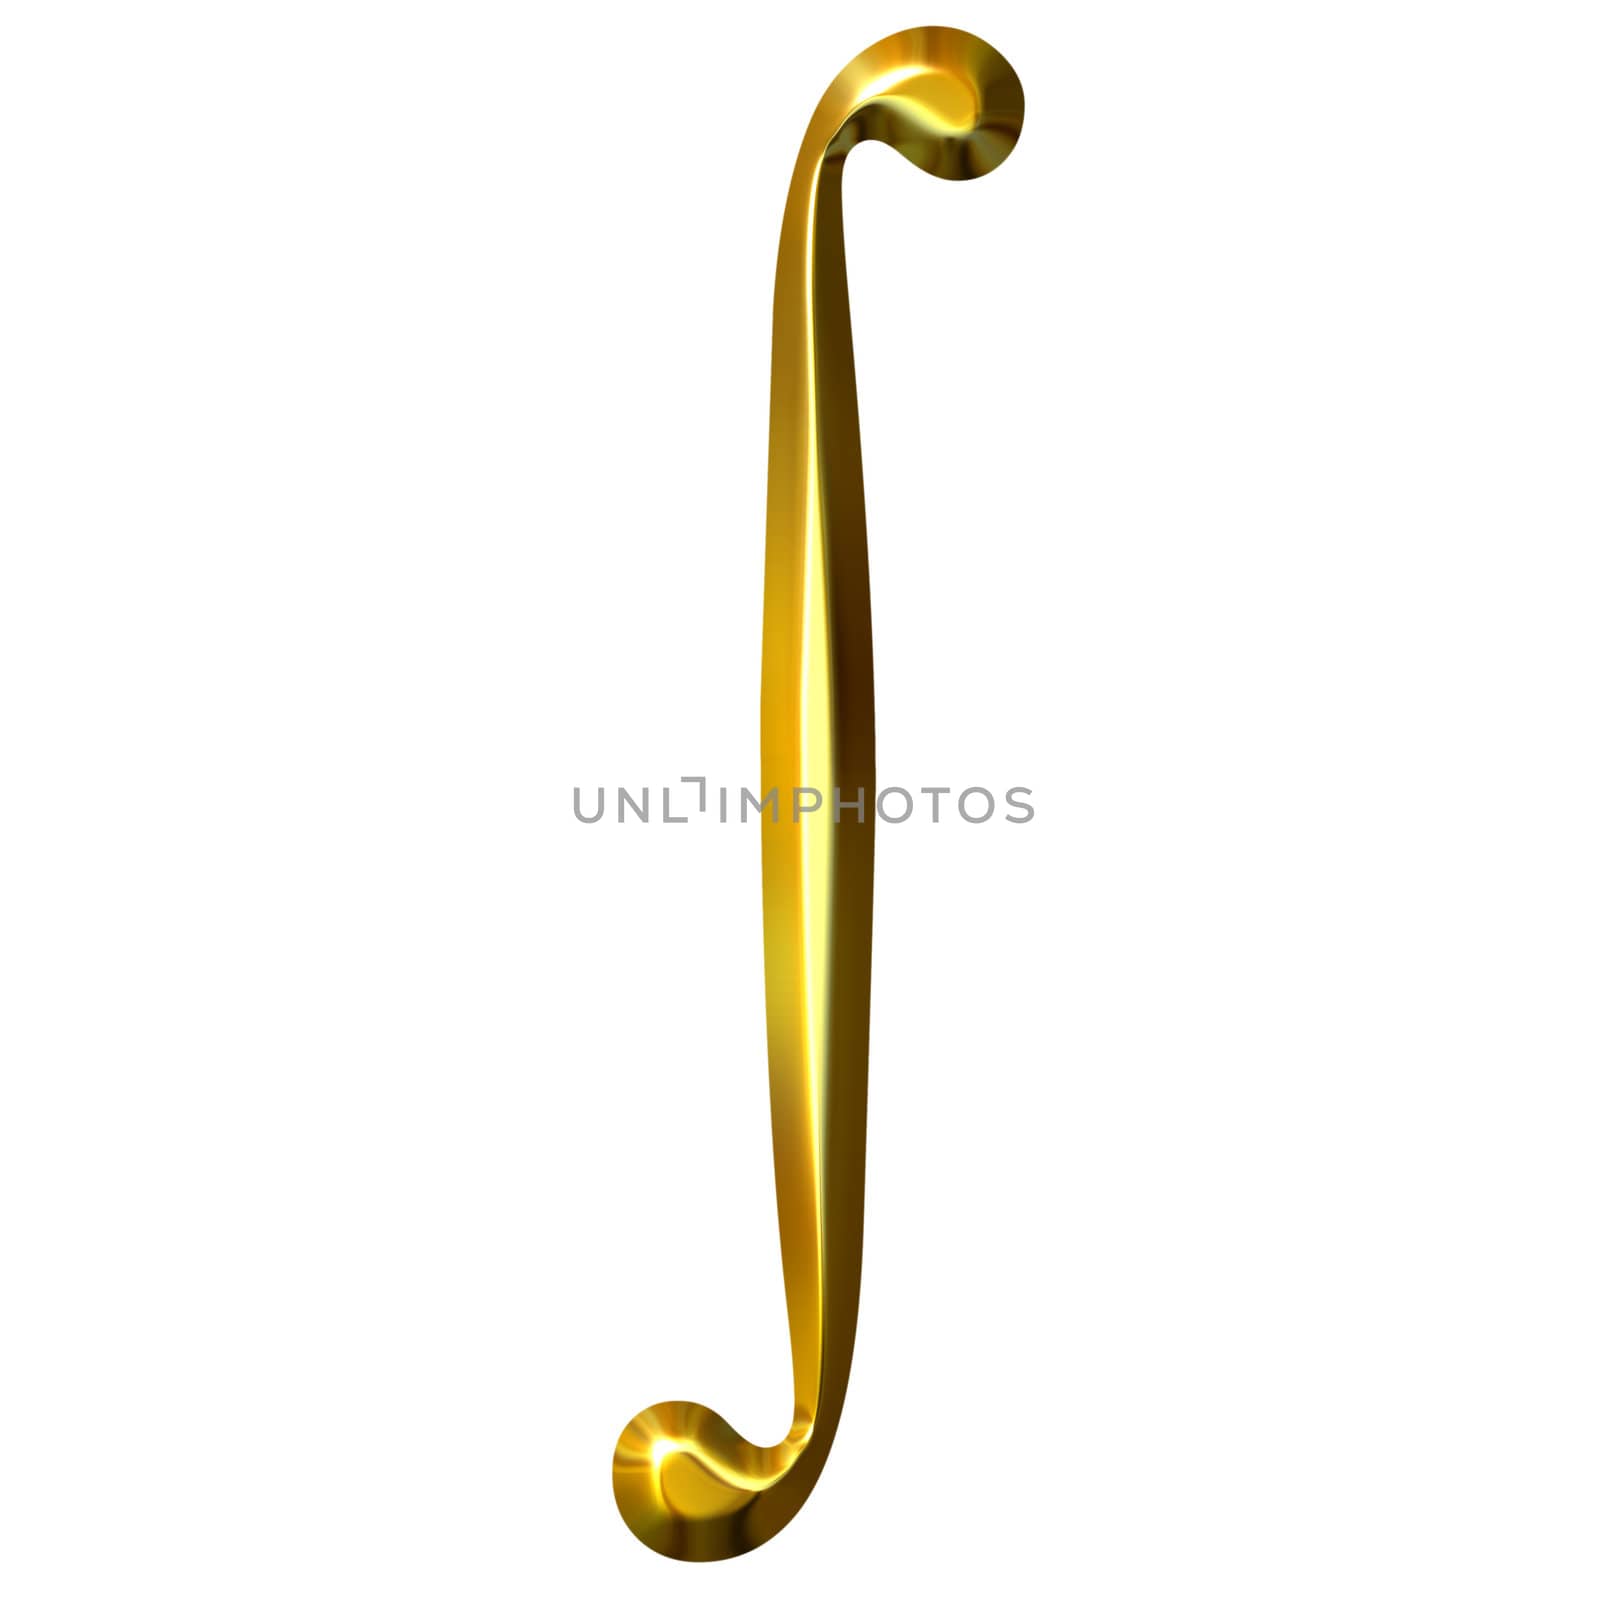 3d golden integral symbol isolated in white